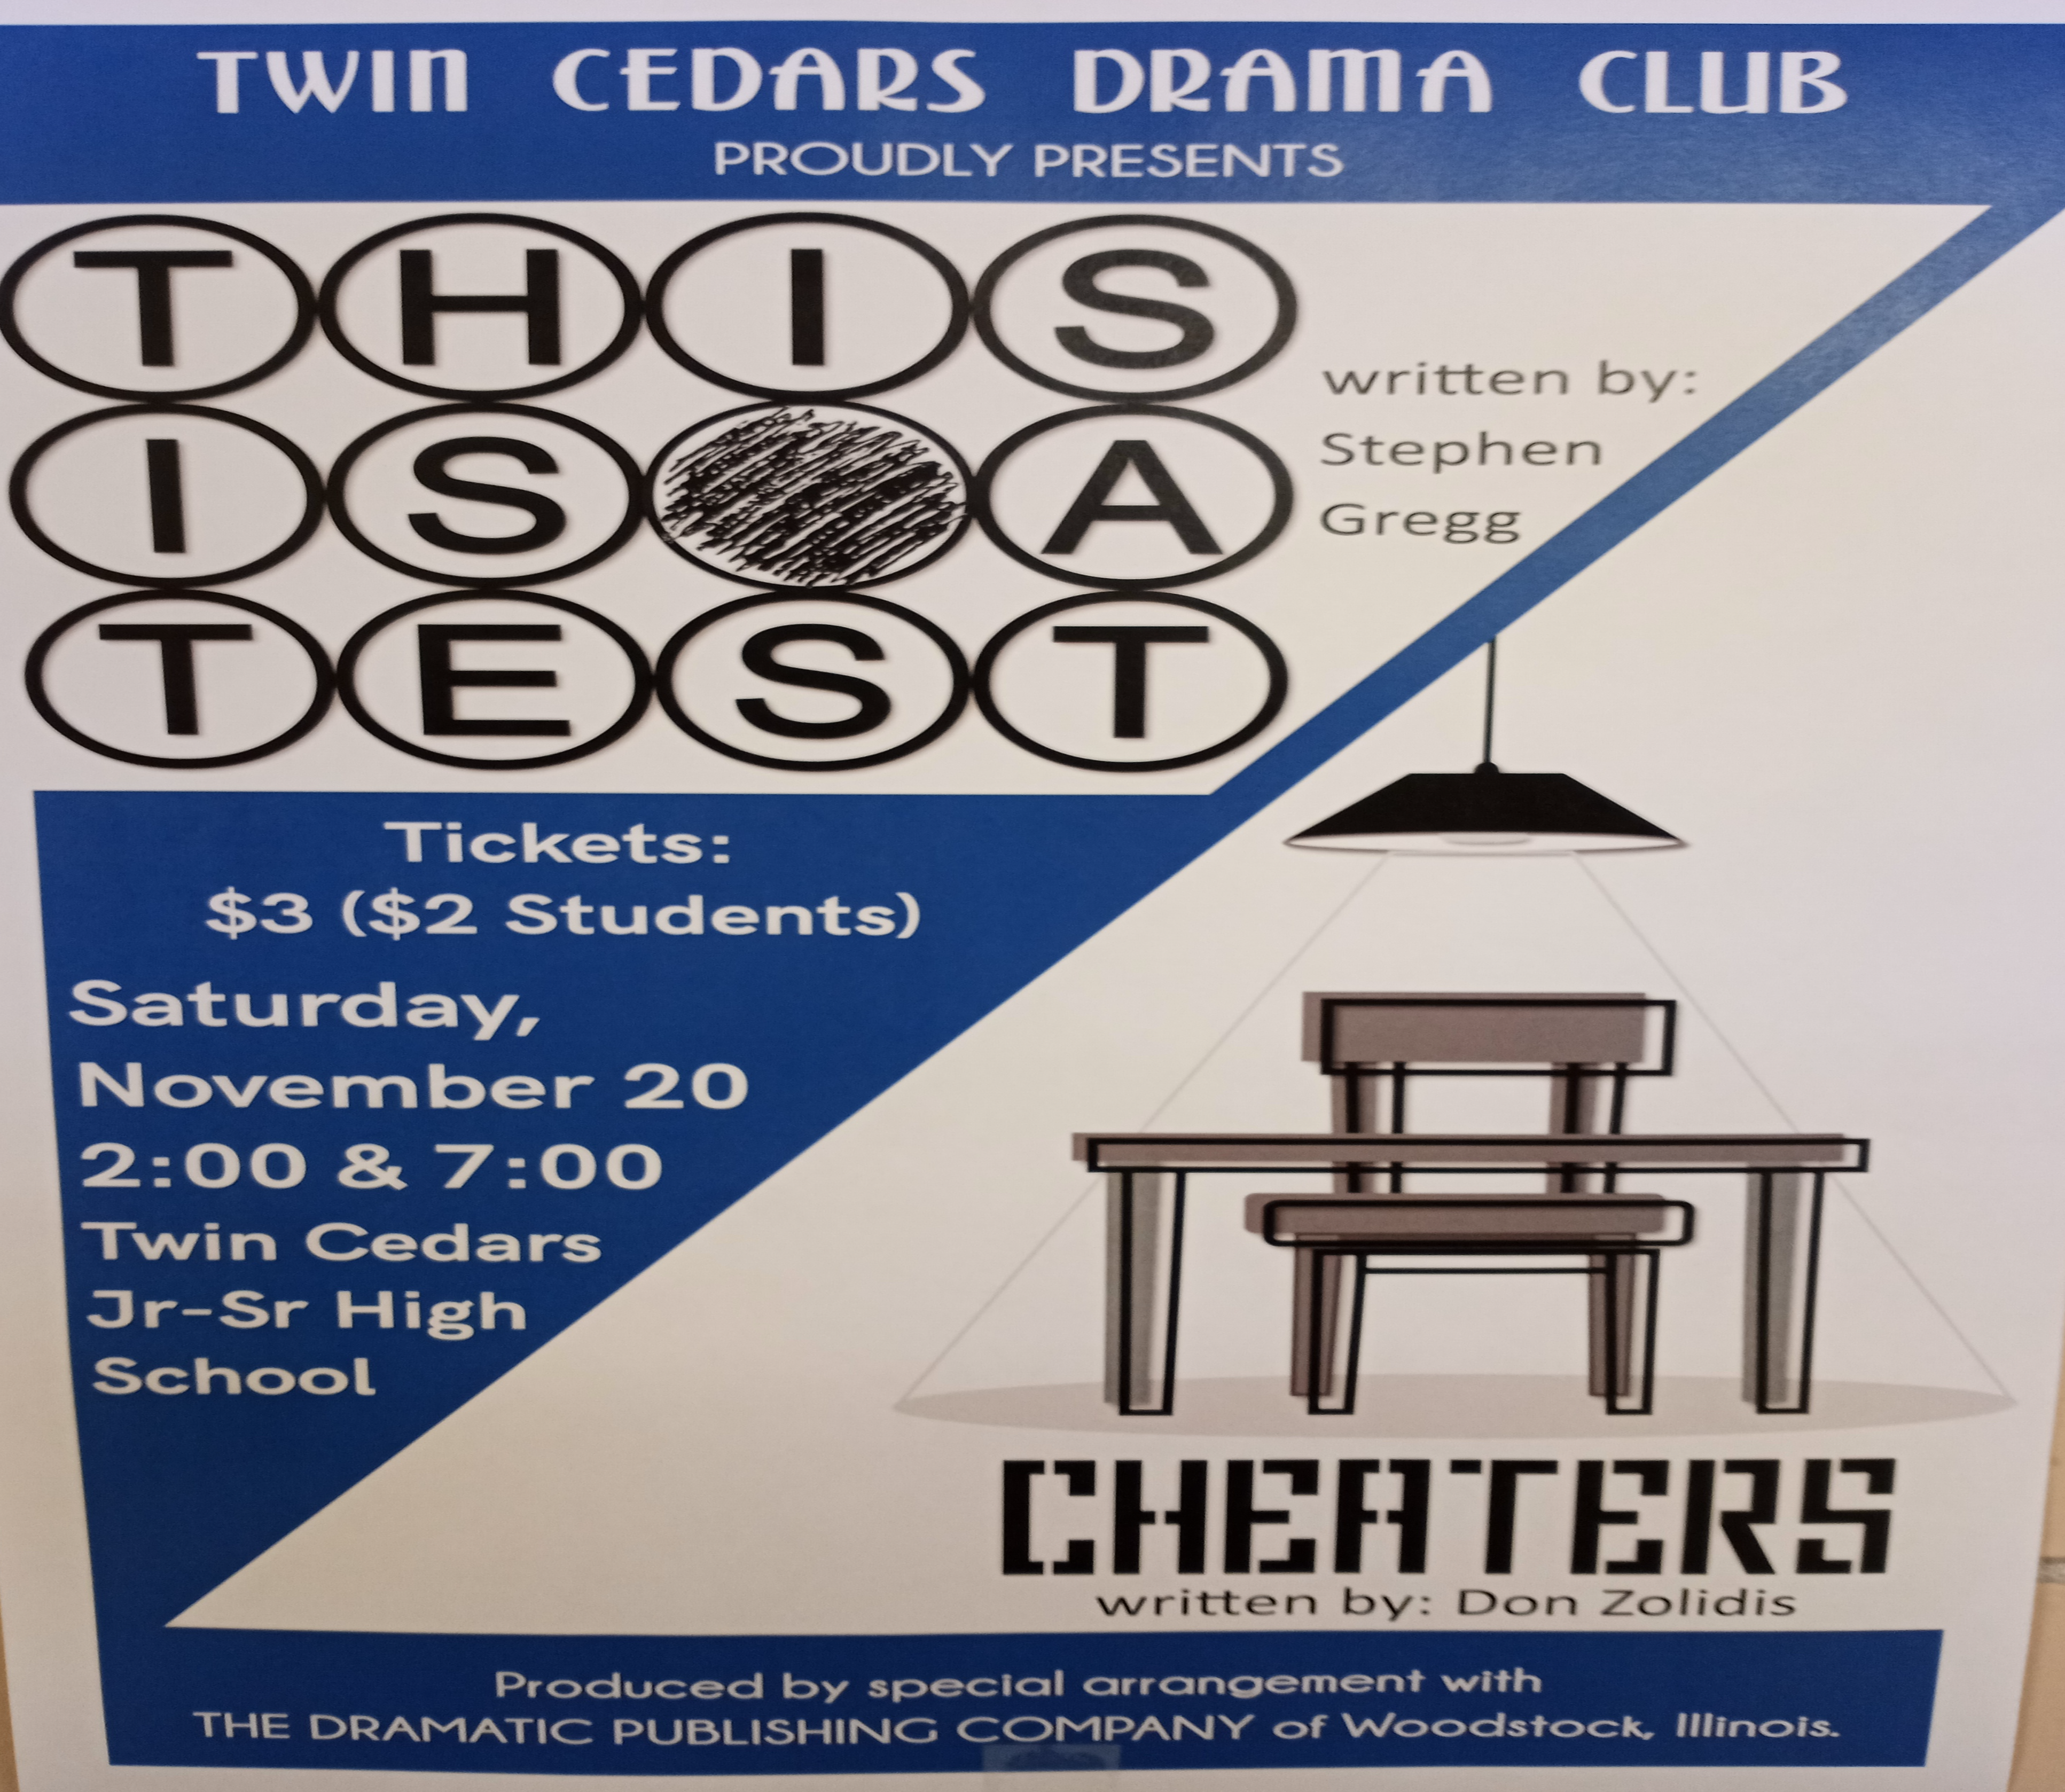 Playbill for 2021.  This is a Test and Cheaters.  Admission is $3($2 for students). November 20, 2021 @ 2:00 & 7:00.